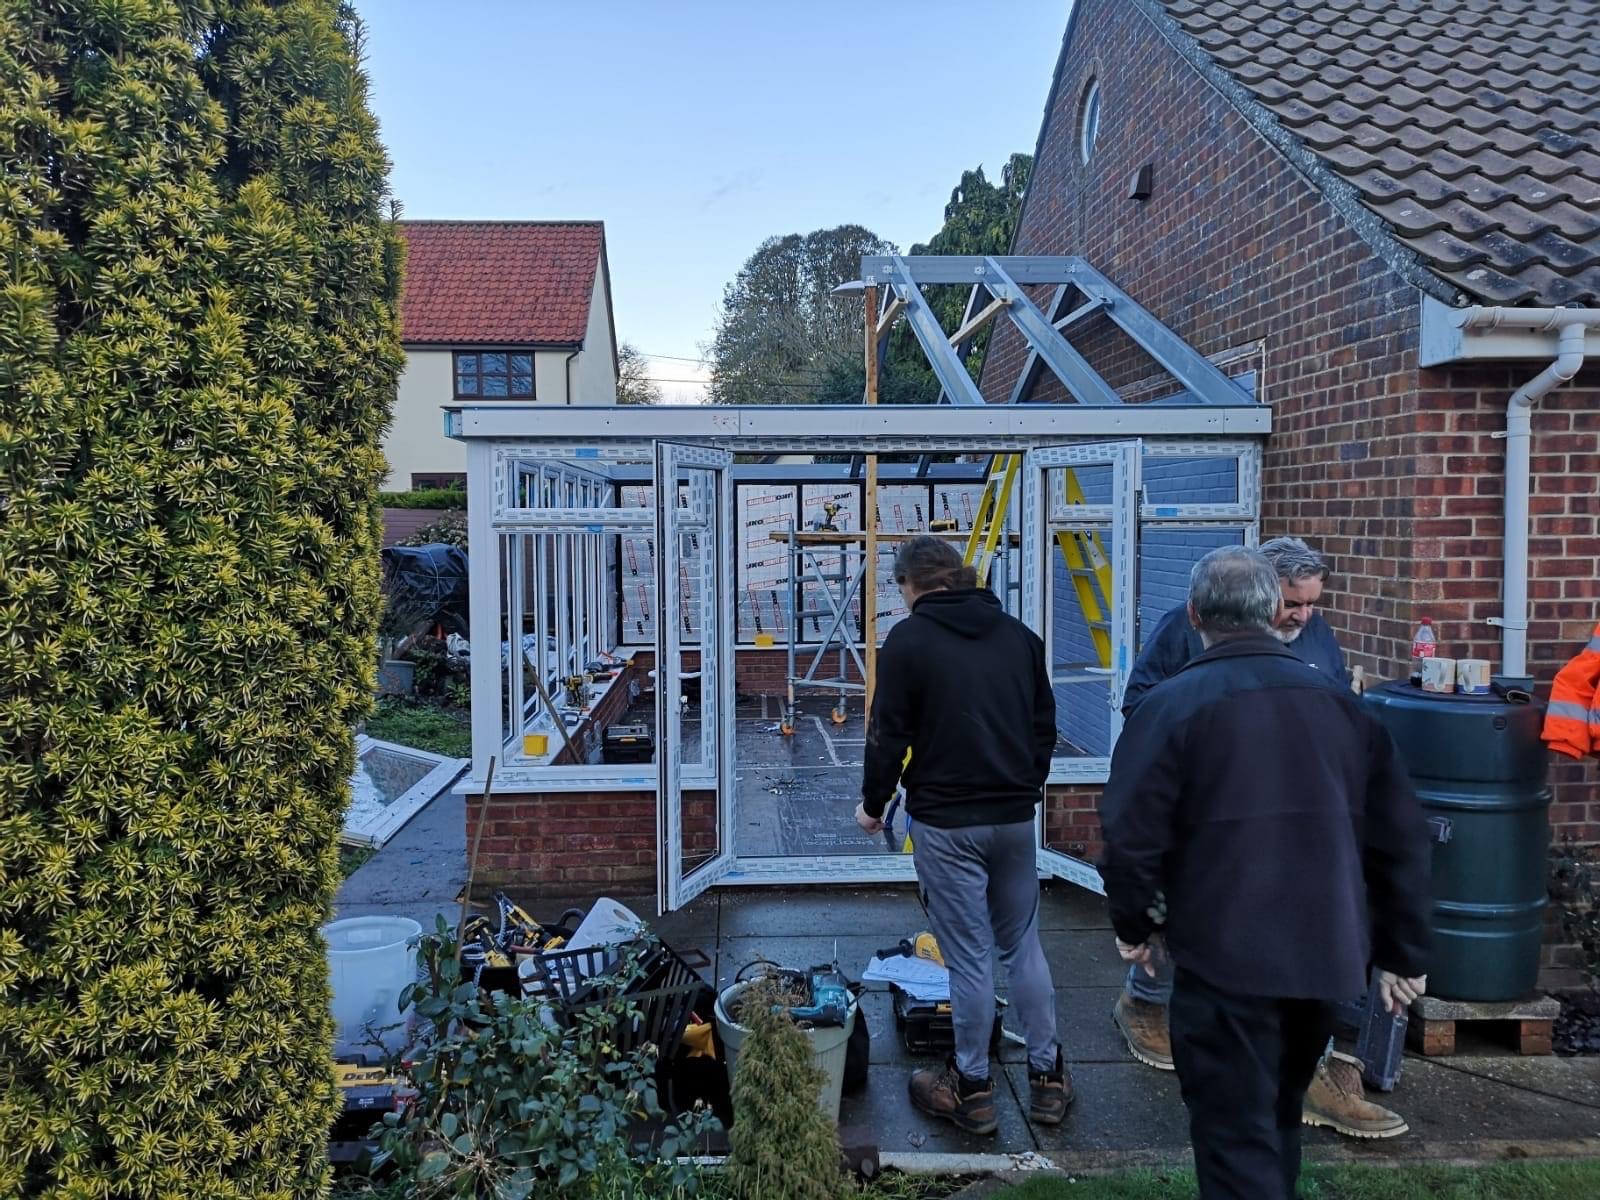 Workers with tools in front of the conservatory that is under construction in garden